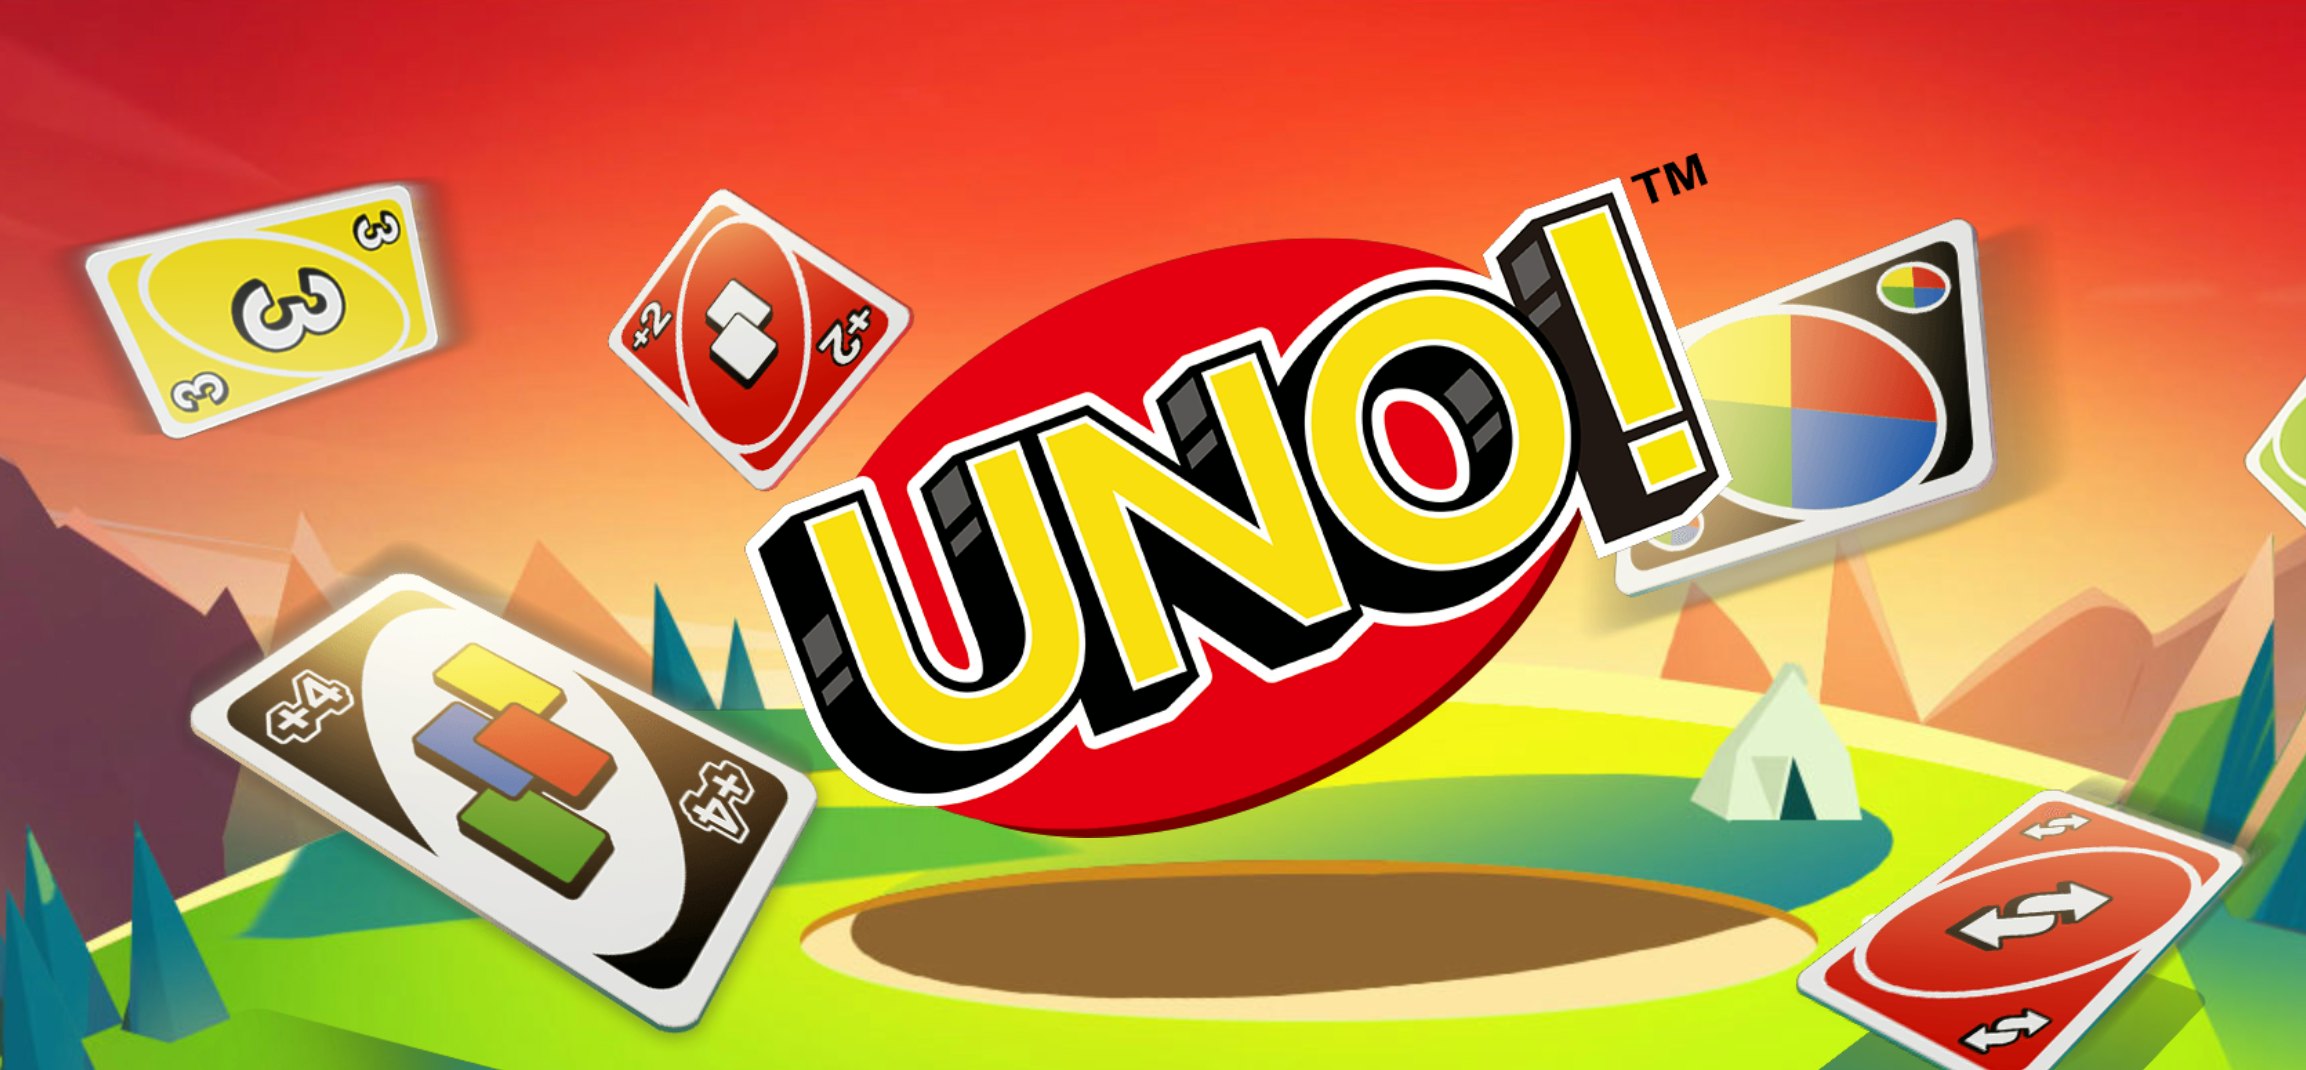 9 Online Games For Kids Grandparents To Play When They Re Not Together - uno plus 4 roblox